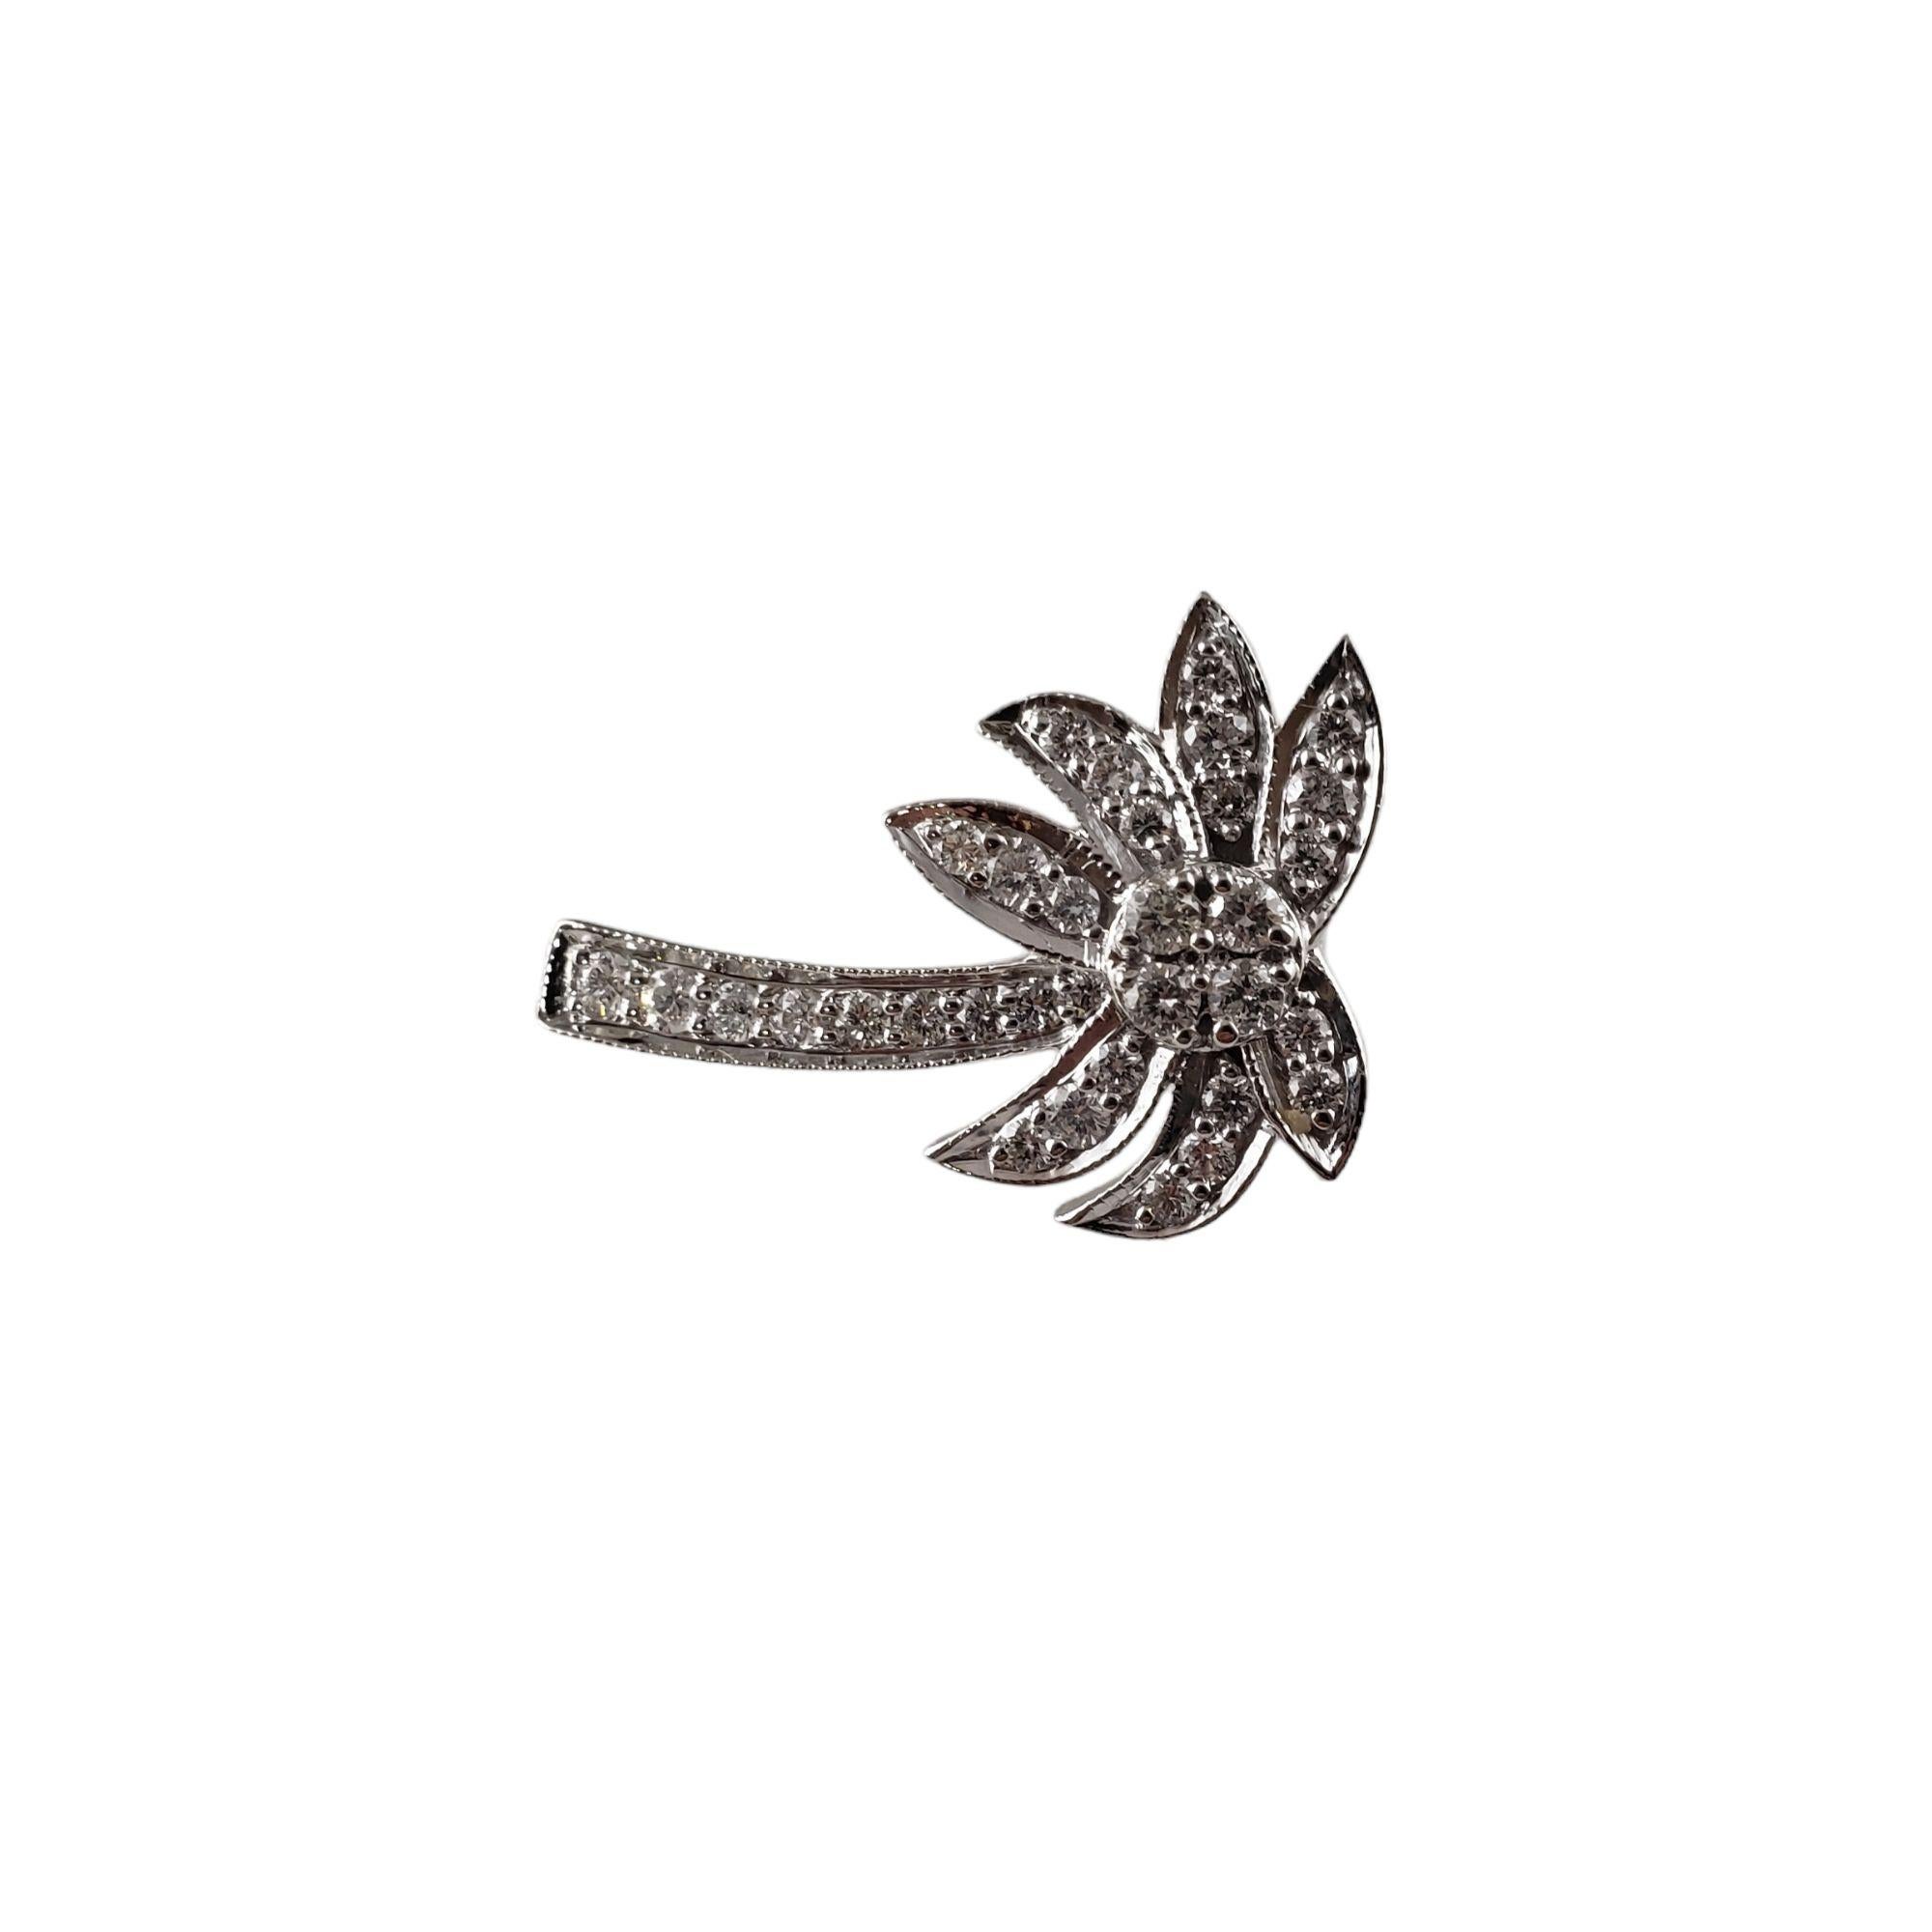 Vintage 14 Karat White Gold and Diamond Palm Tree Pendant-

This sparkling palm tree pendant features 33 round brilliant cut diamonds set in classic 14K white gold.

*Chain not included.

Approximate total diamond weight: .85 ct.

Diamond color: